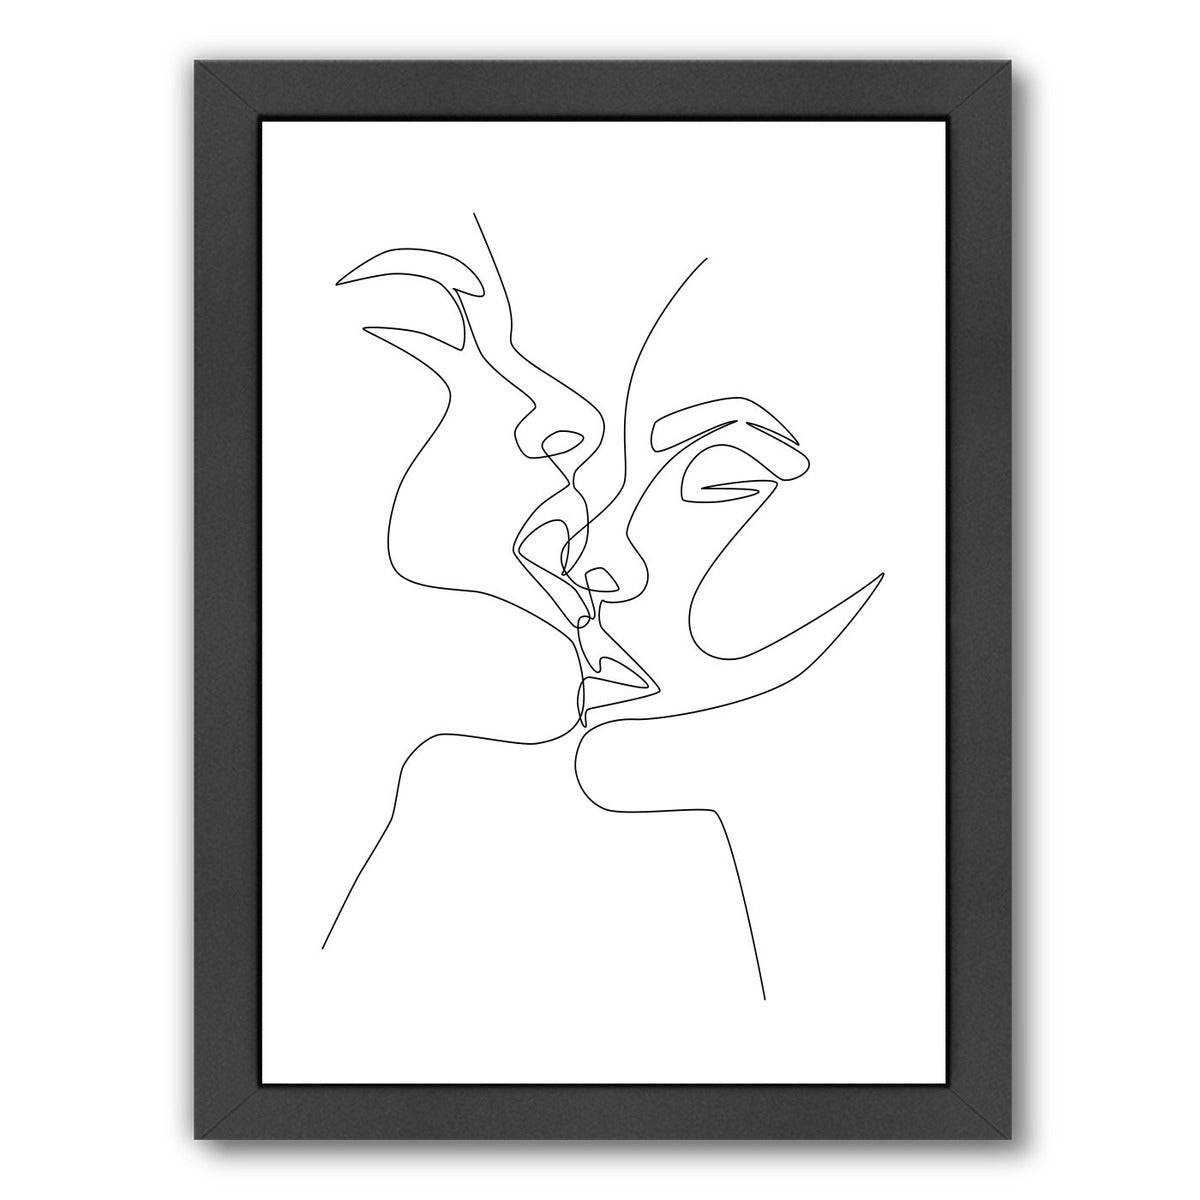 Intense & Intimate by Explicit Design Framed Print - Americanflat